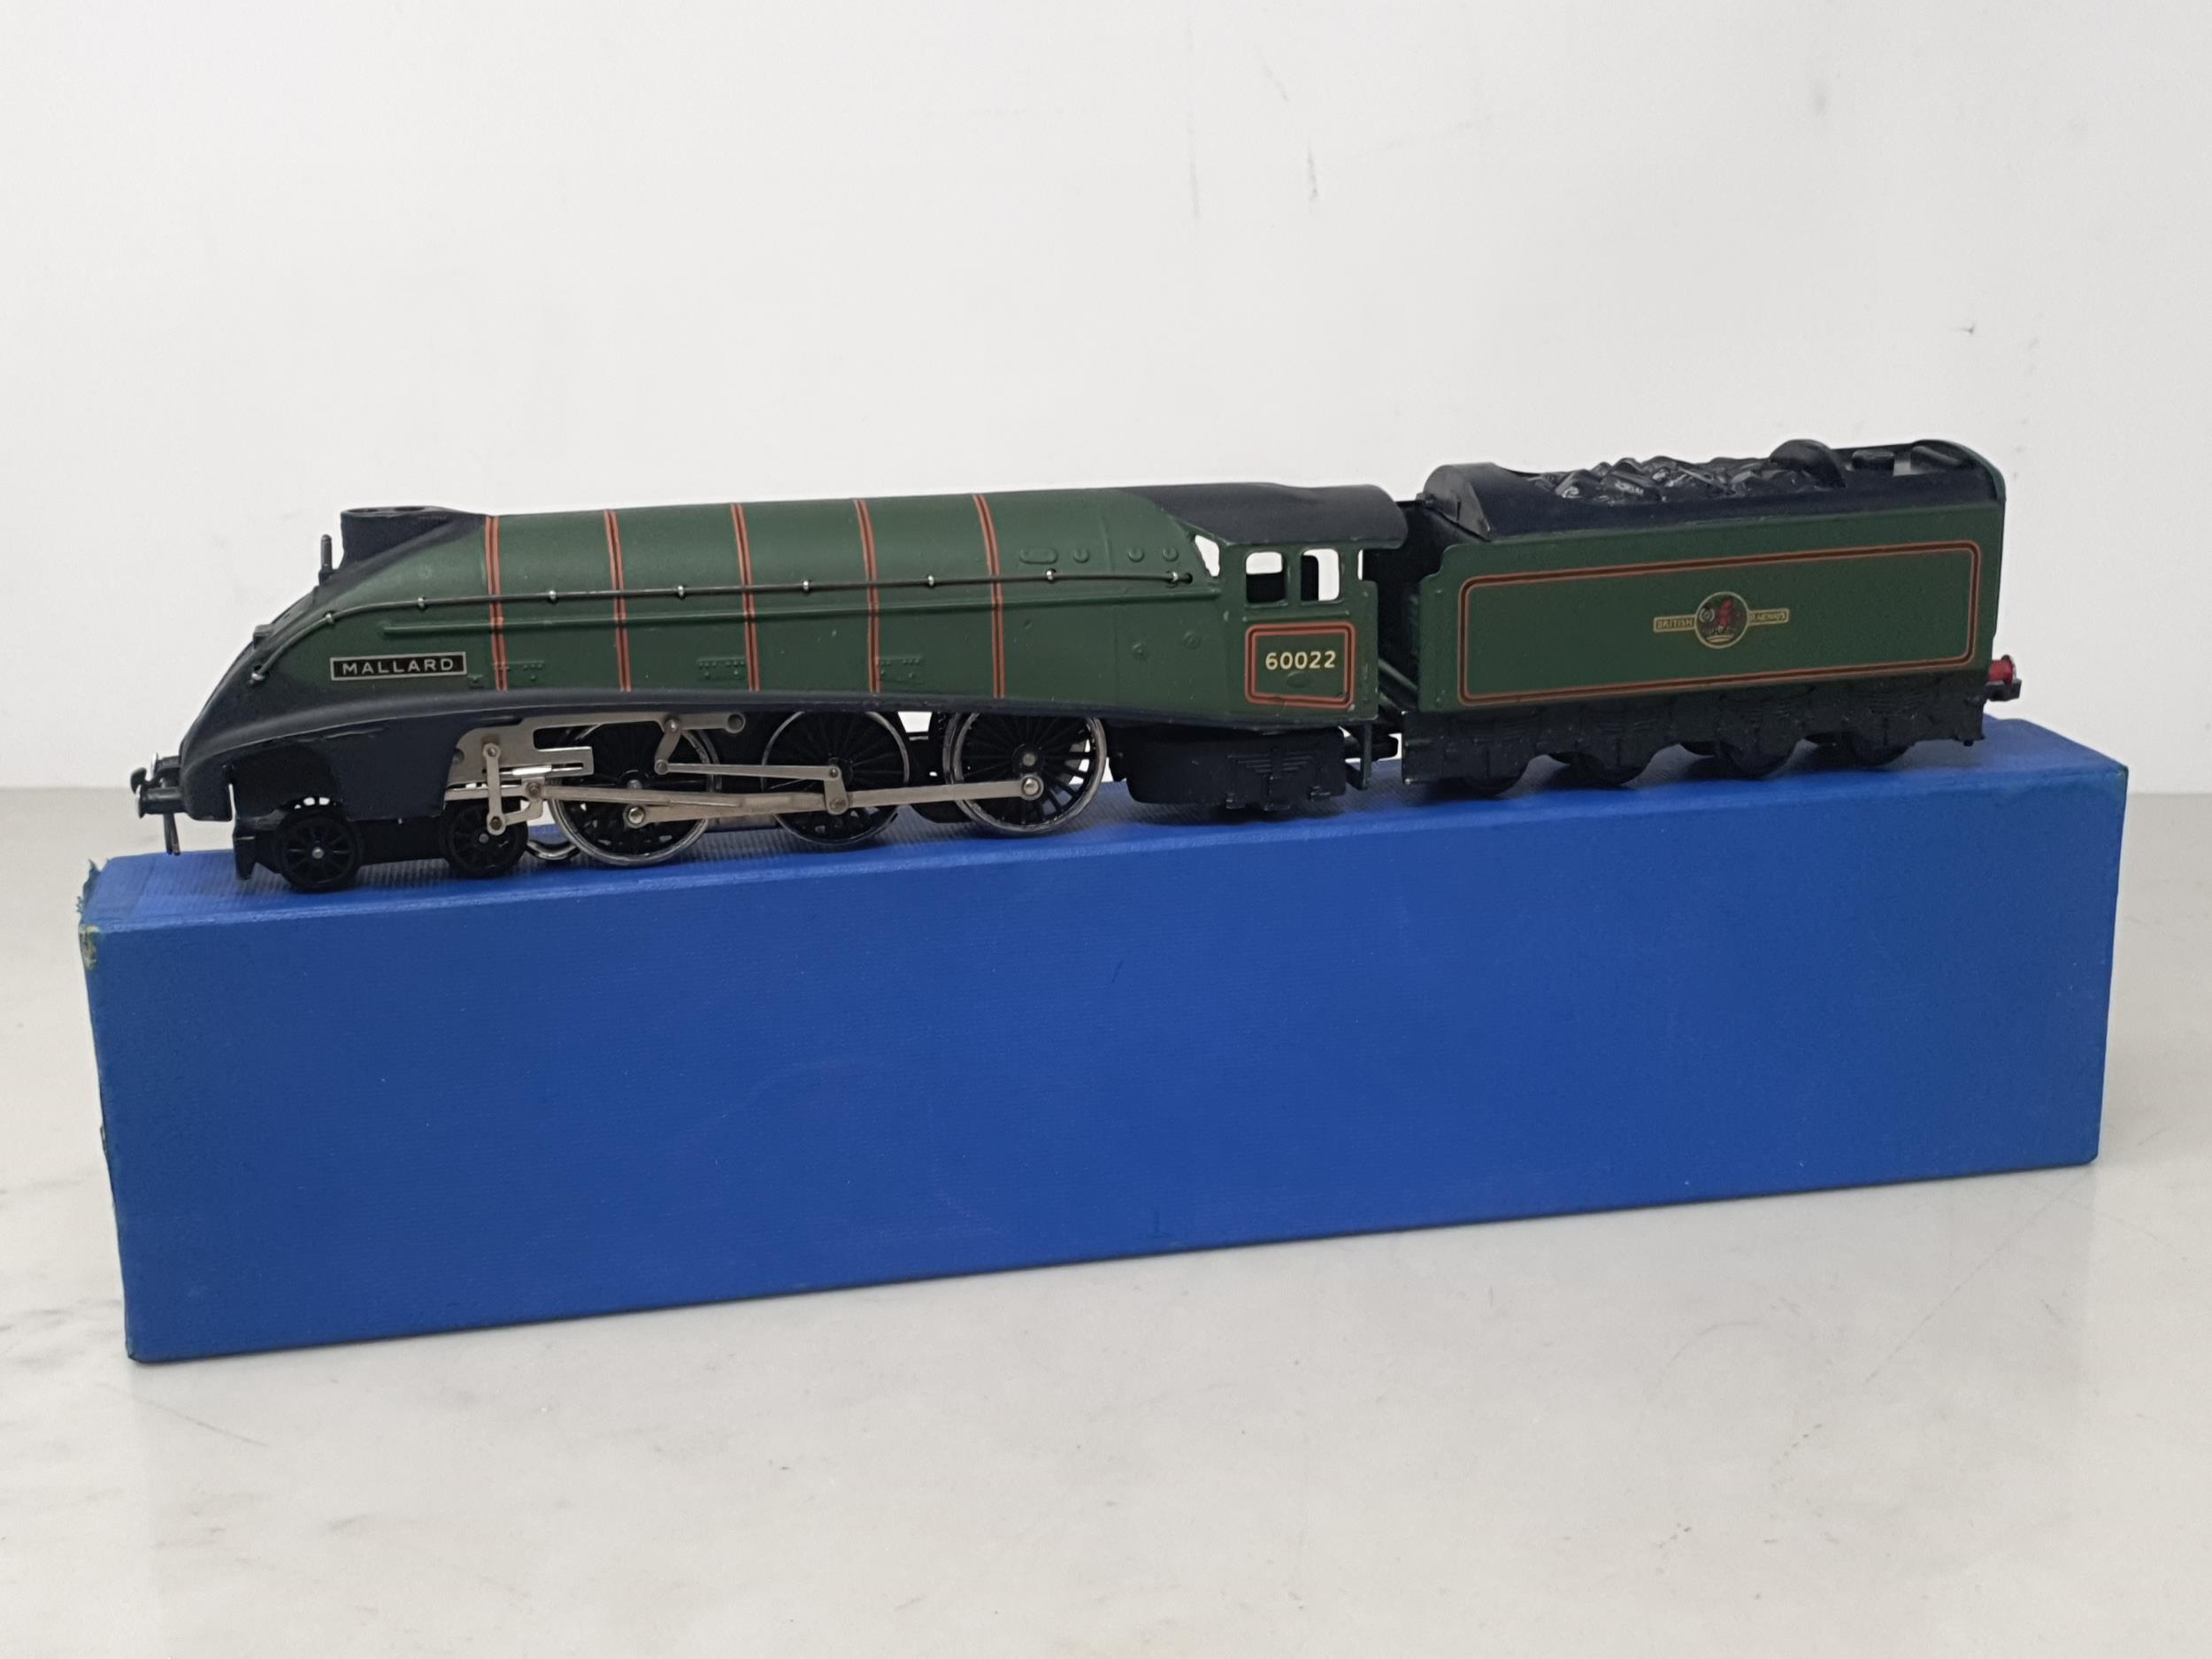 A boxed Hornby Dublo 3211 nickel silver 'Mallard' Locomotive, unused and in mint condition showing - Image 4 of 7